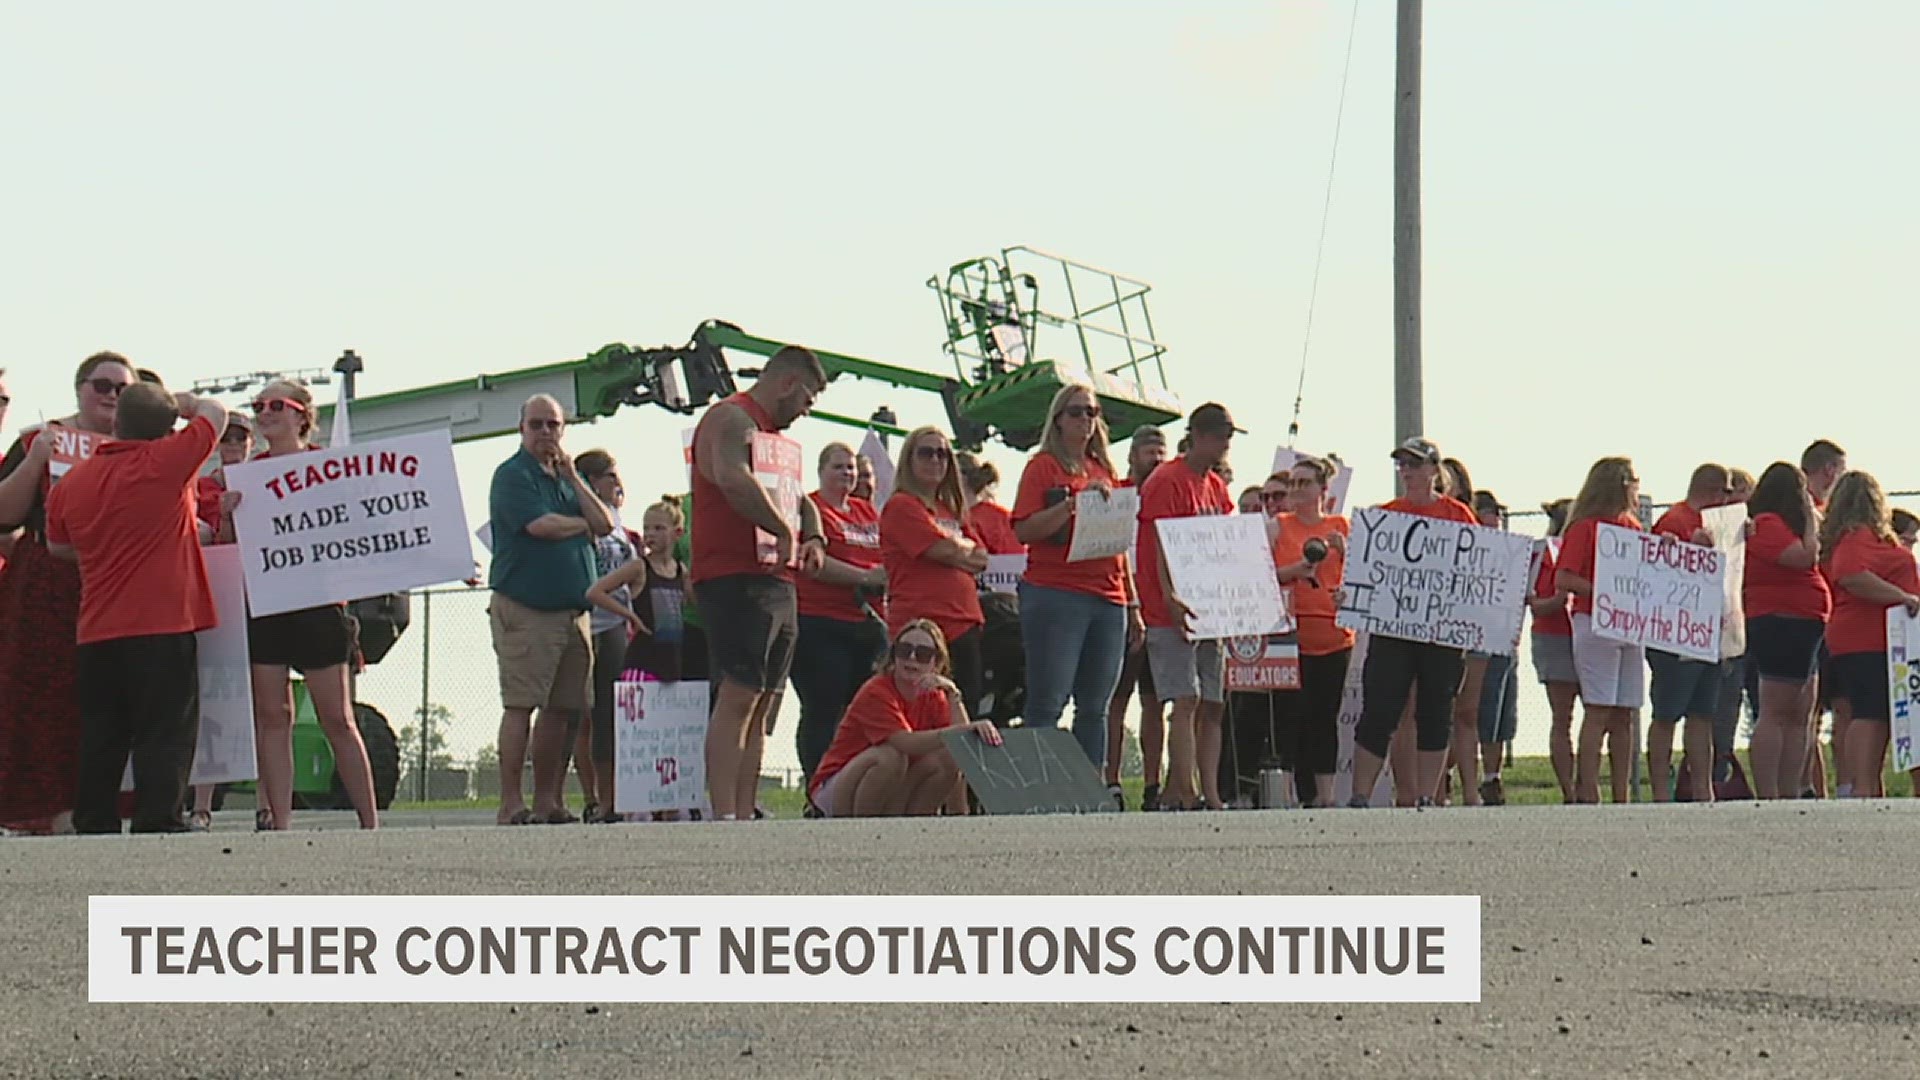 The union's last negotiations with the school district was on Aug. 10. Teachers hope to reach an agreement at the next meeting on Aug. 28.